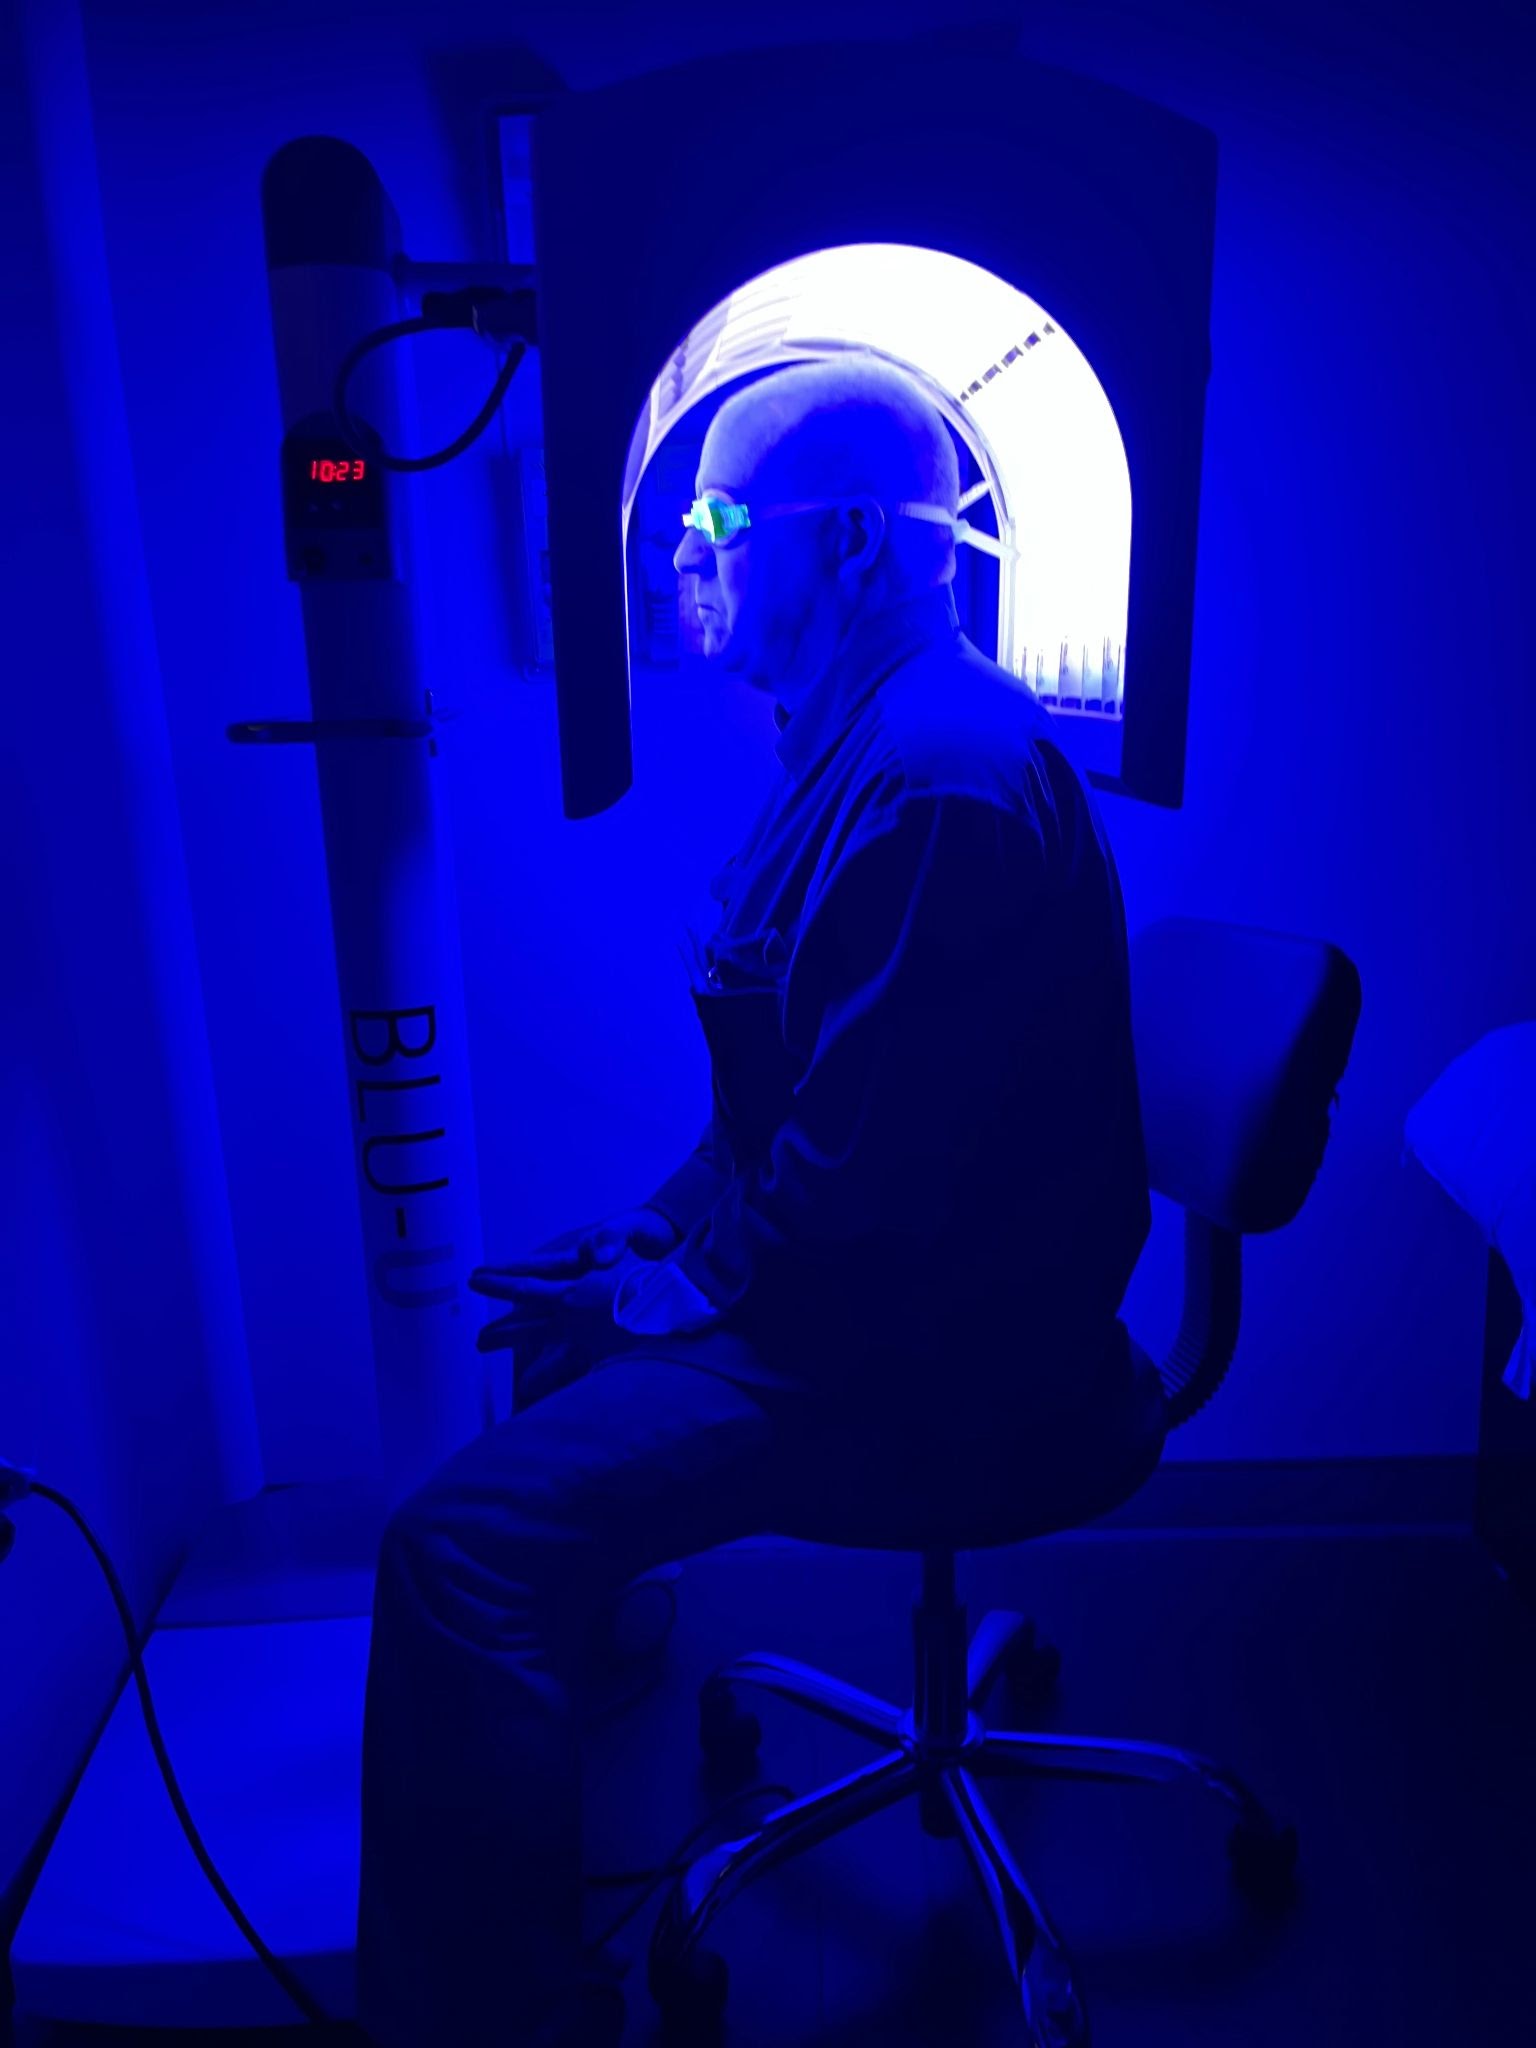 The blue light treatment of a person